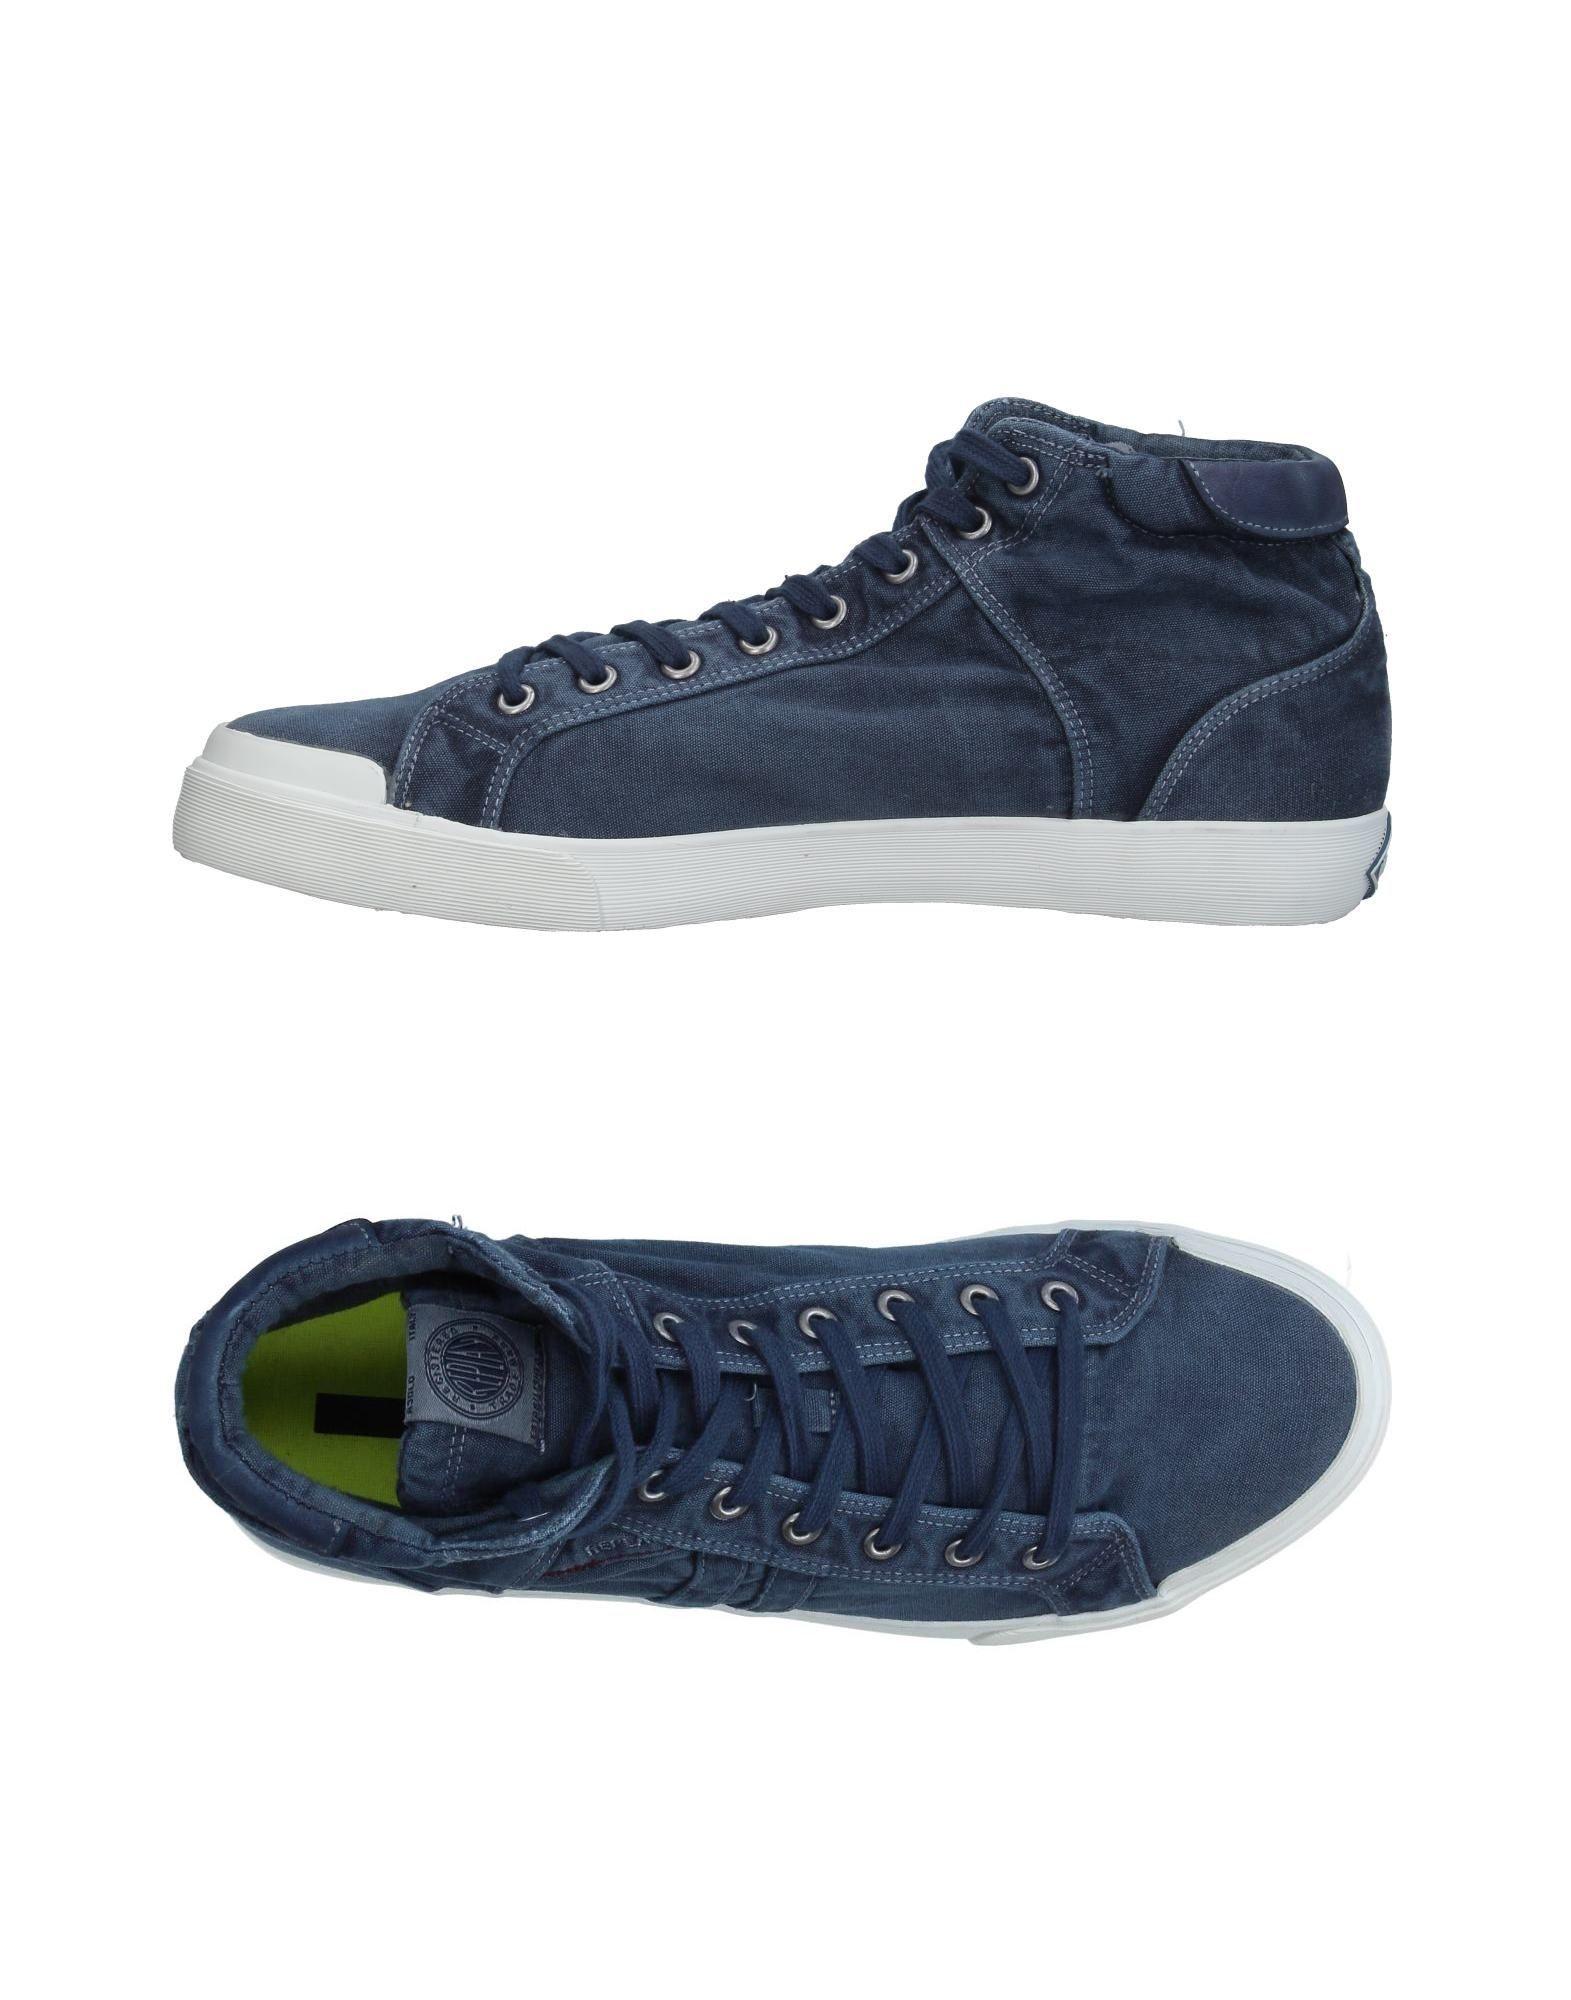 Lyst - Replay High-tops & Sneakers in Blue for Men